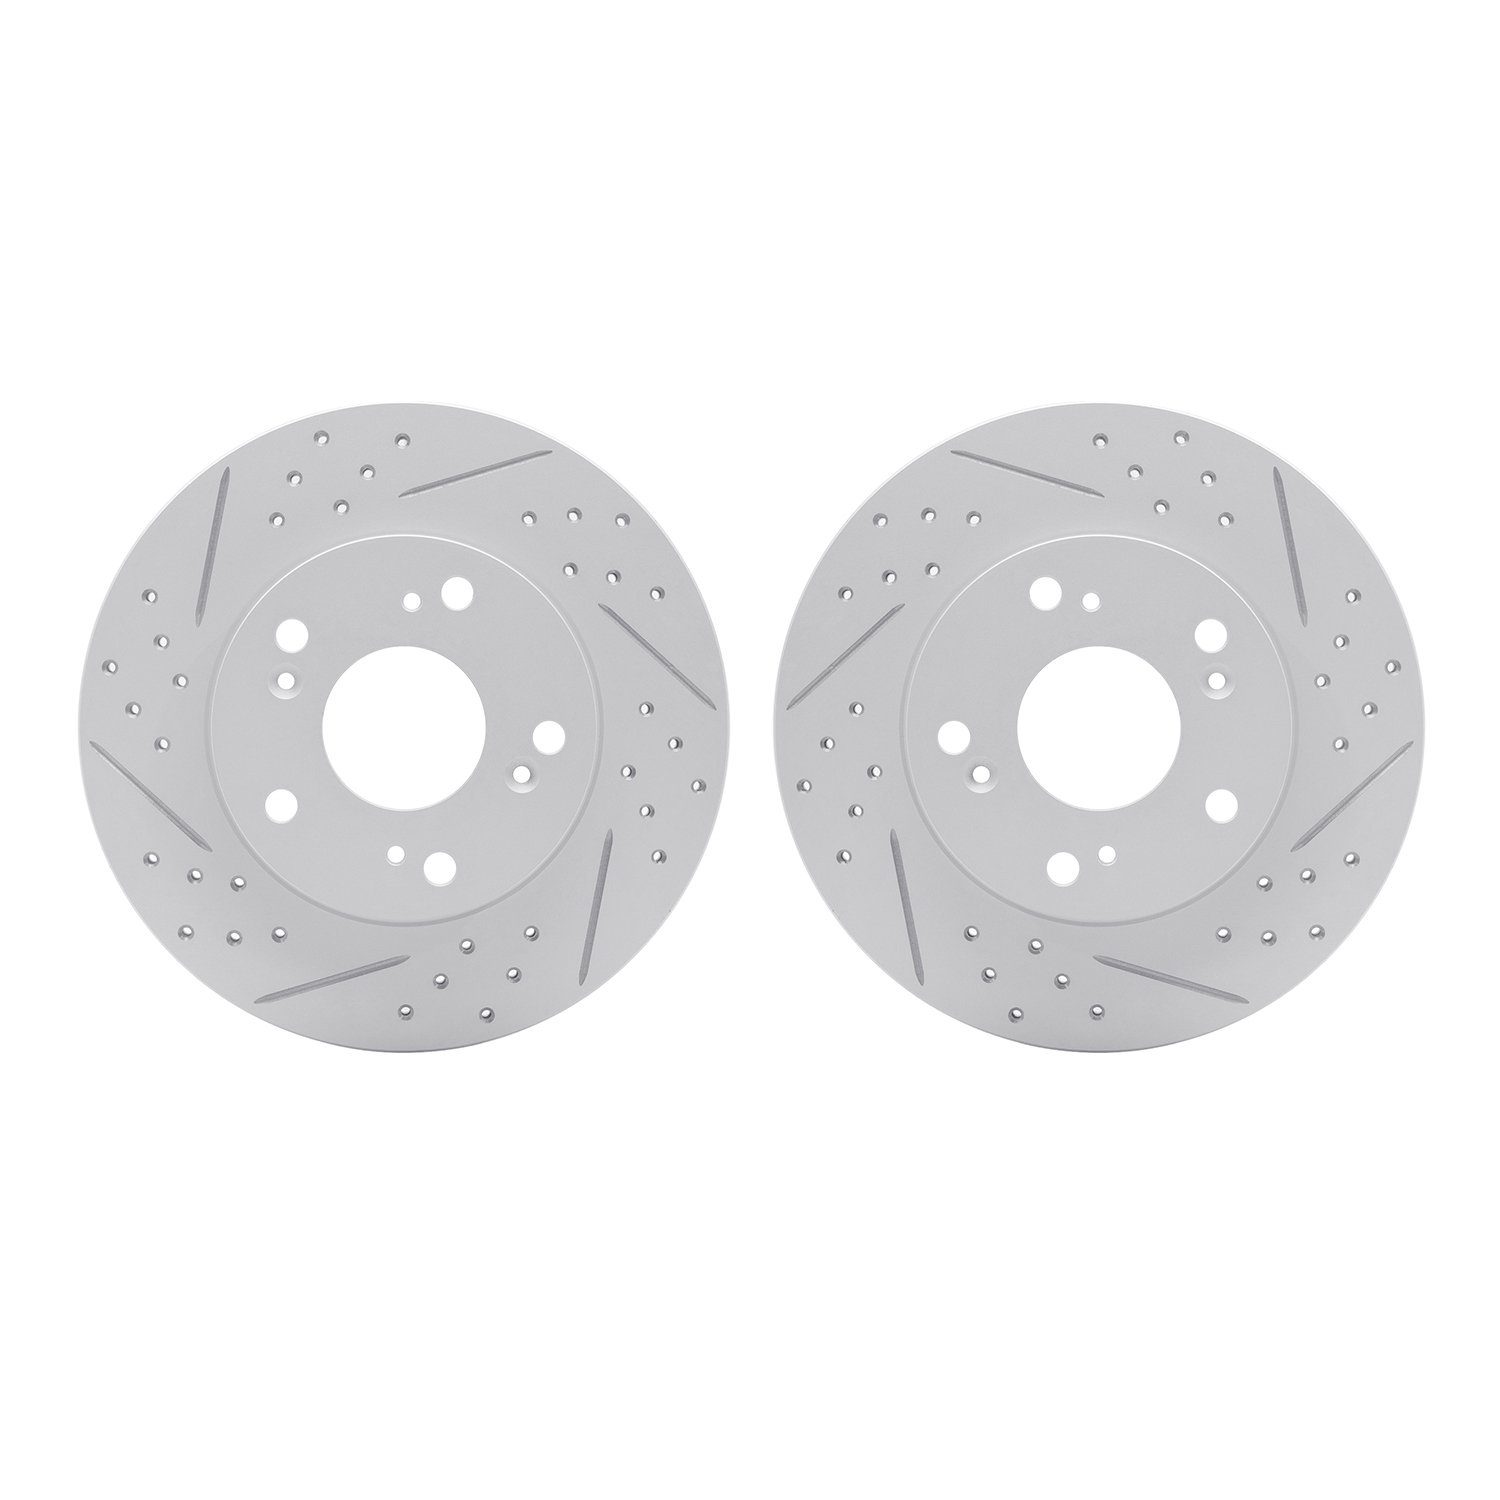 2002-59006 Geoperformance Drilled/Slotted Brake Rotors, 2012-2015 Acura/Honda, Position: Front